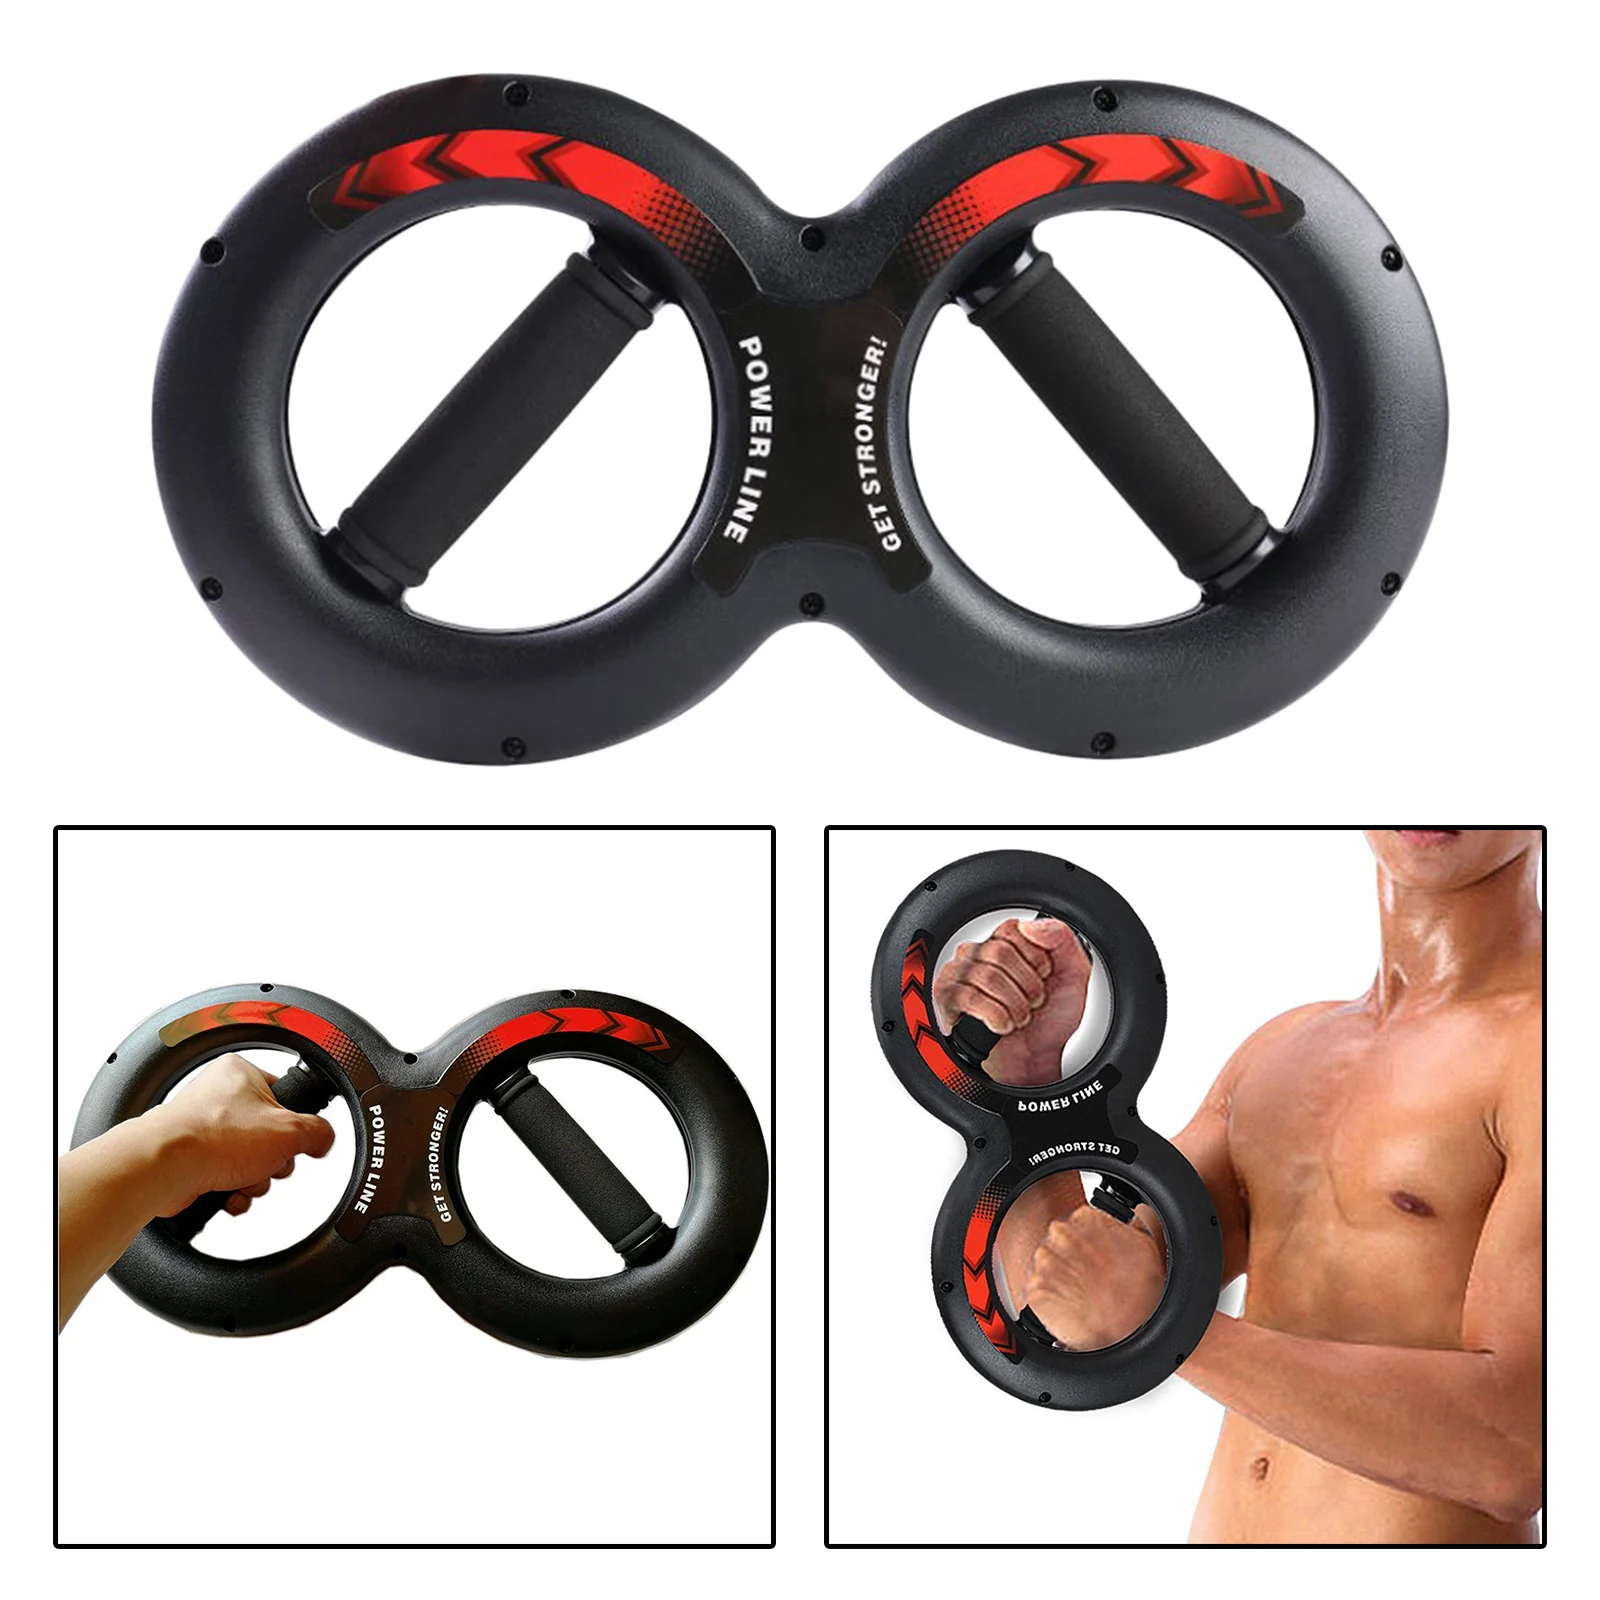 Forearms Shoulder Wrist Trainer Fitness Exerciser Workout Equipments for Home Office Gym